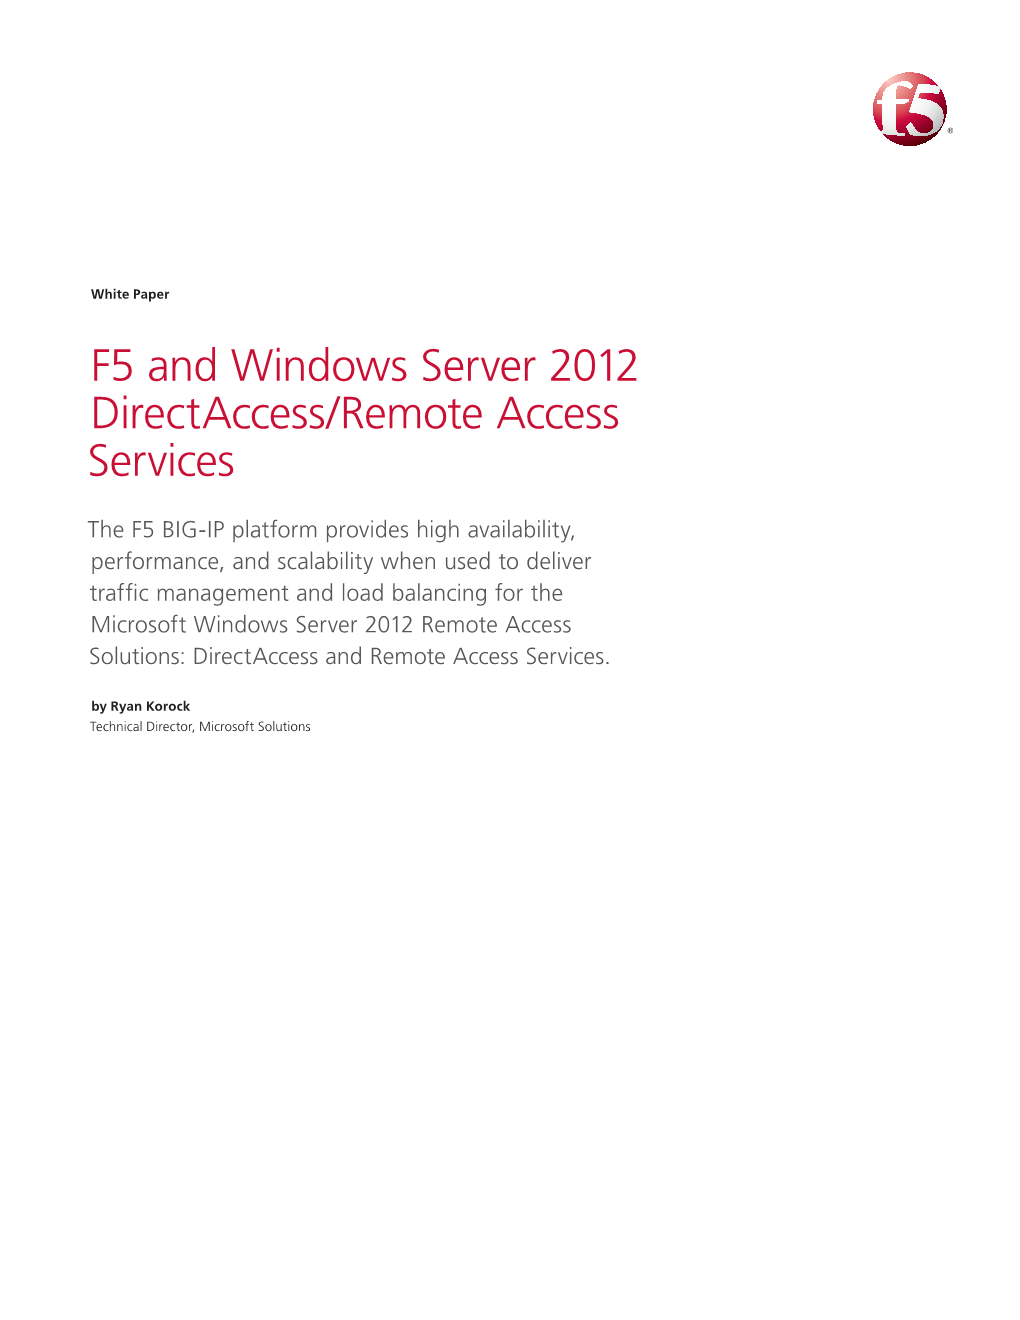 F5 and Windows Server 2012 Directaccess/Remote Access Services